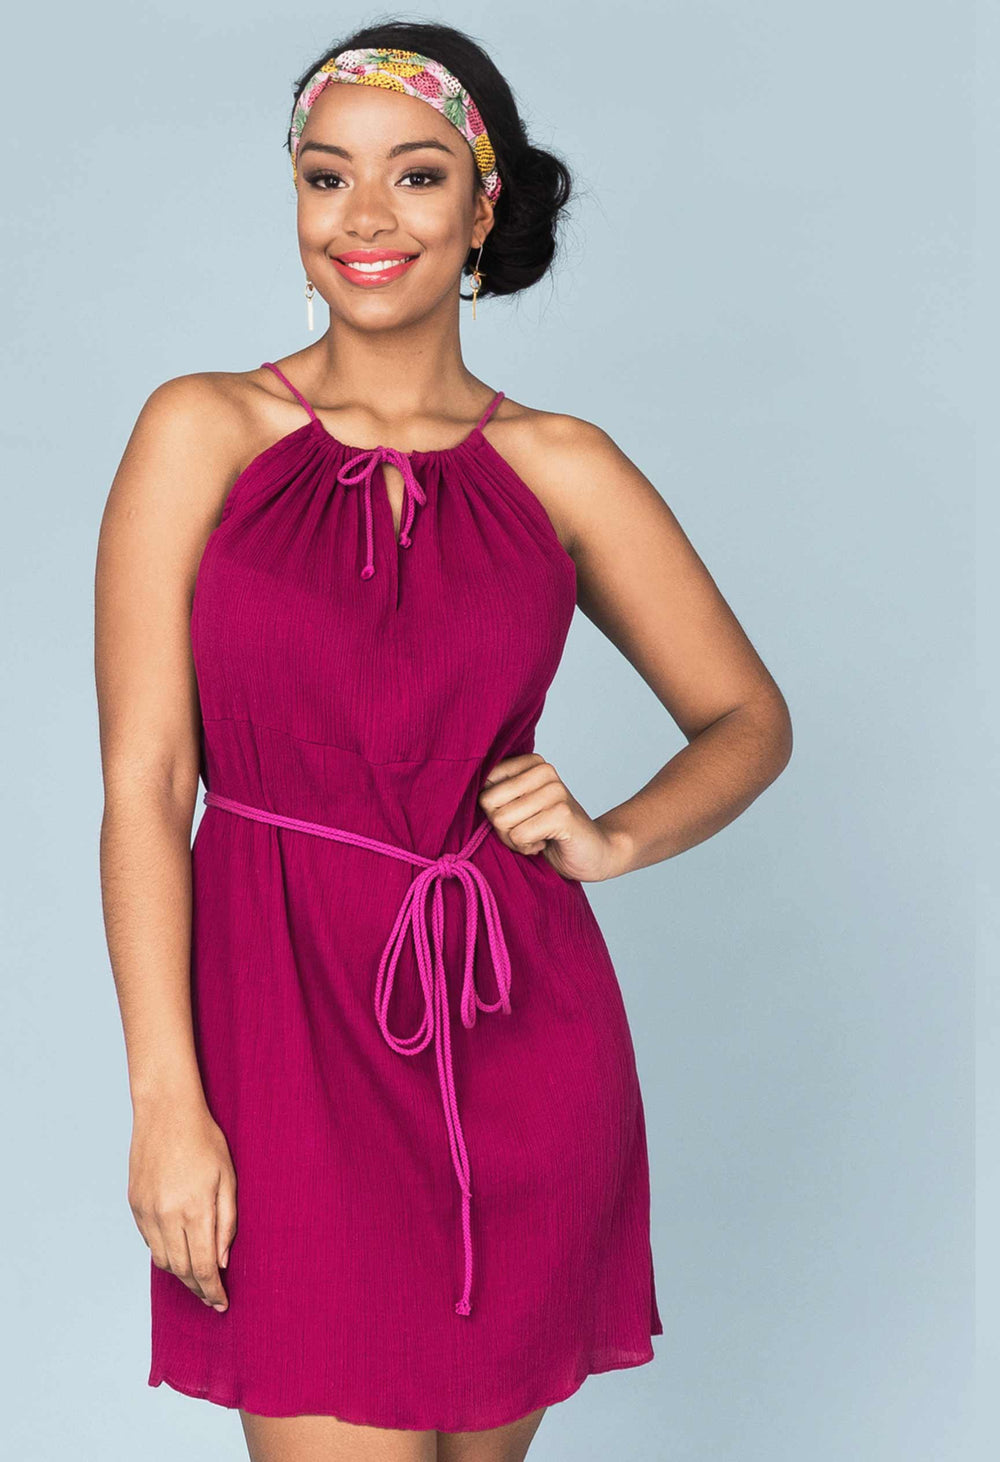 Woman wearing the Spritz Dress sewing pattern from Our Lady of Leisure on The Fold Line. A dress pattern made in cheesecloth, voile, gauze, cotton, linen, rayon or polyester fabrics, featuring a relaxed fit, mini length, gathered front and back bodice wit